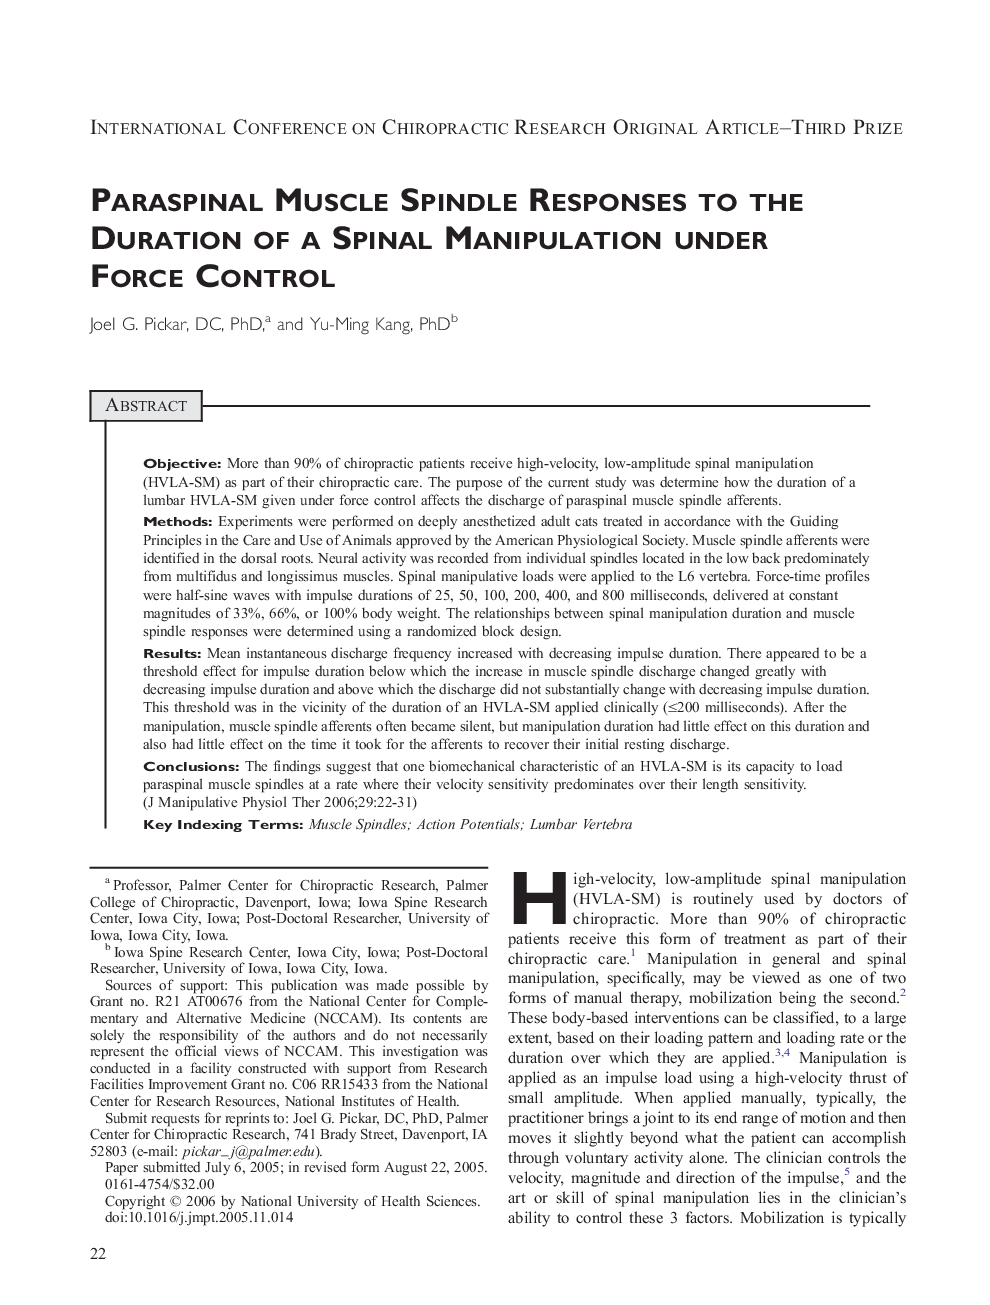 Paraspinal Muscle Spindle Responses to the Duration of A Spinal Manipulation Under Force Control 